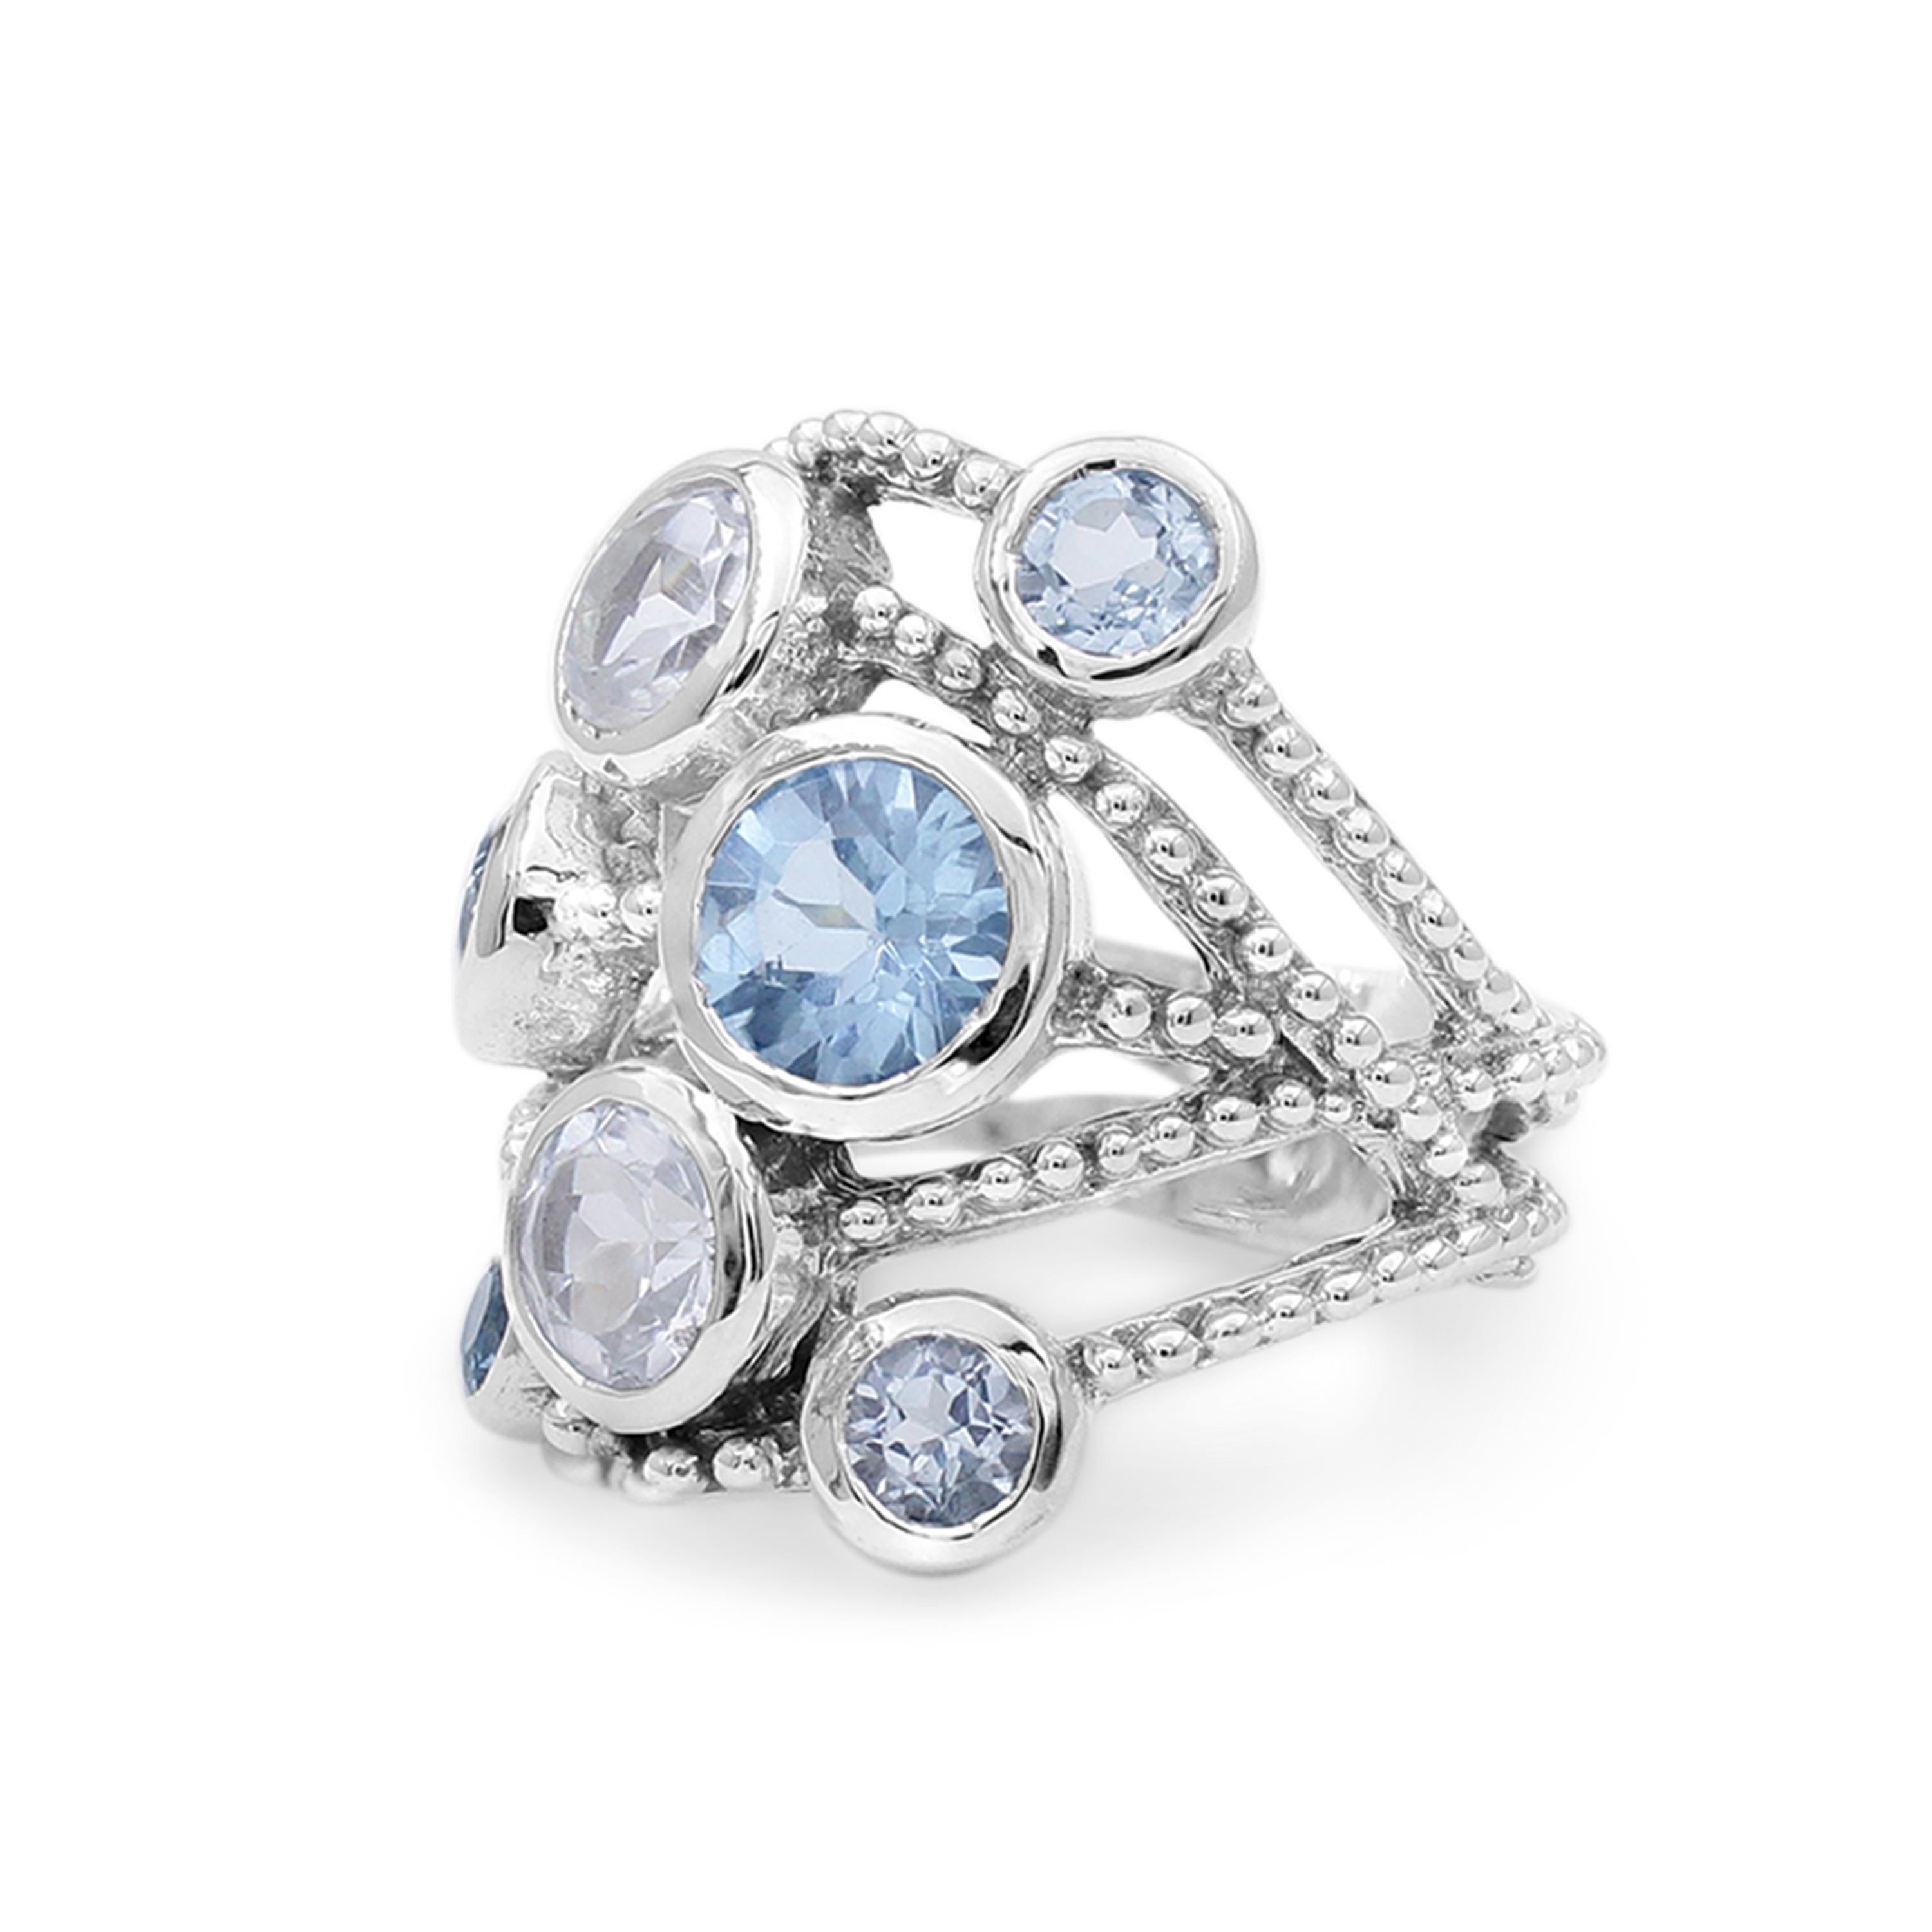 This spectacular Stephen Dweck Sterling Silver Statement Ring features layers of beaded sterling silver with a sparkle of dreamy hues cast from bezel set London Blue Topaz & White Topaz (3mm-6mm). Drawing inspiration from a love of nature and